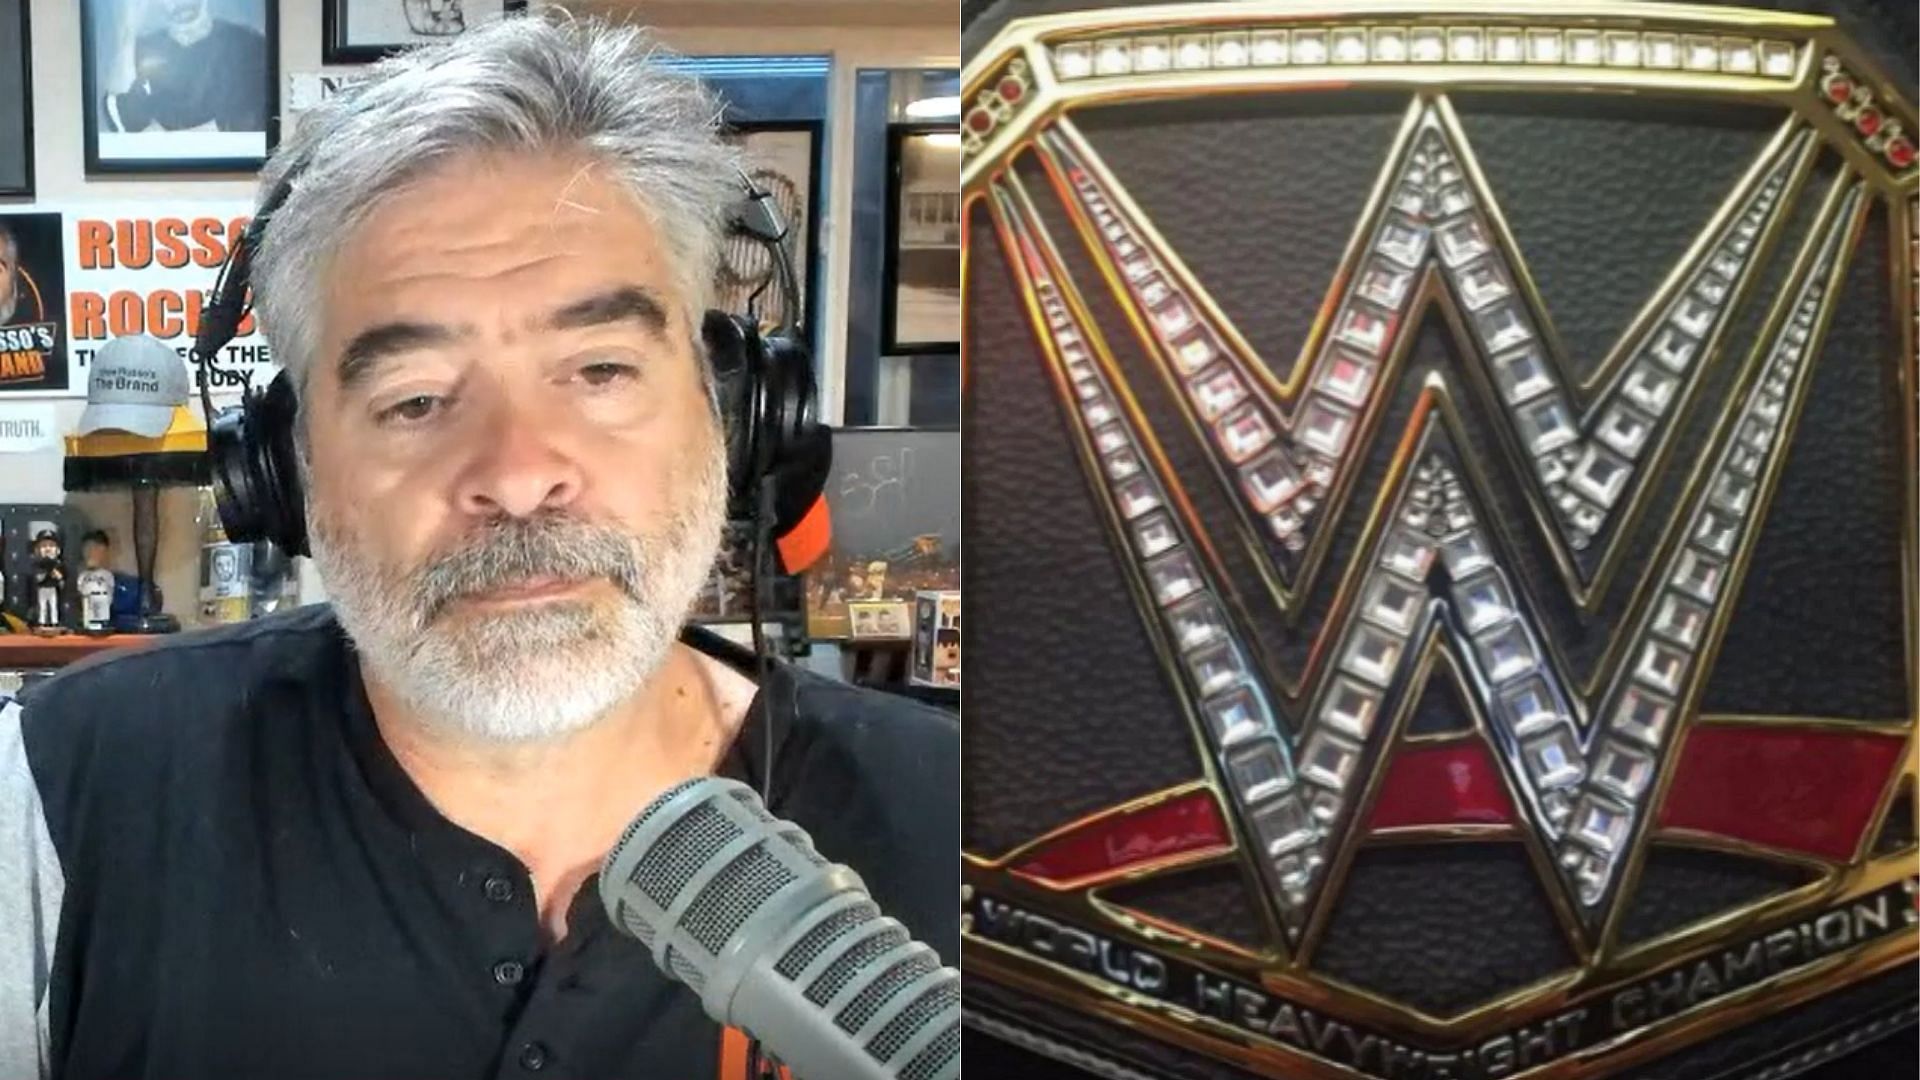 Former WCW and WWE writer Vince Russo